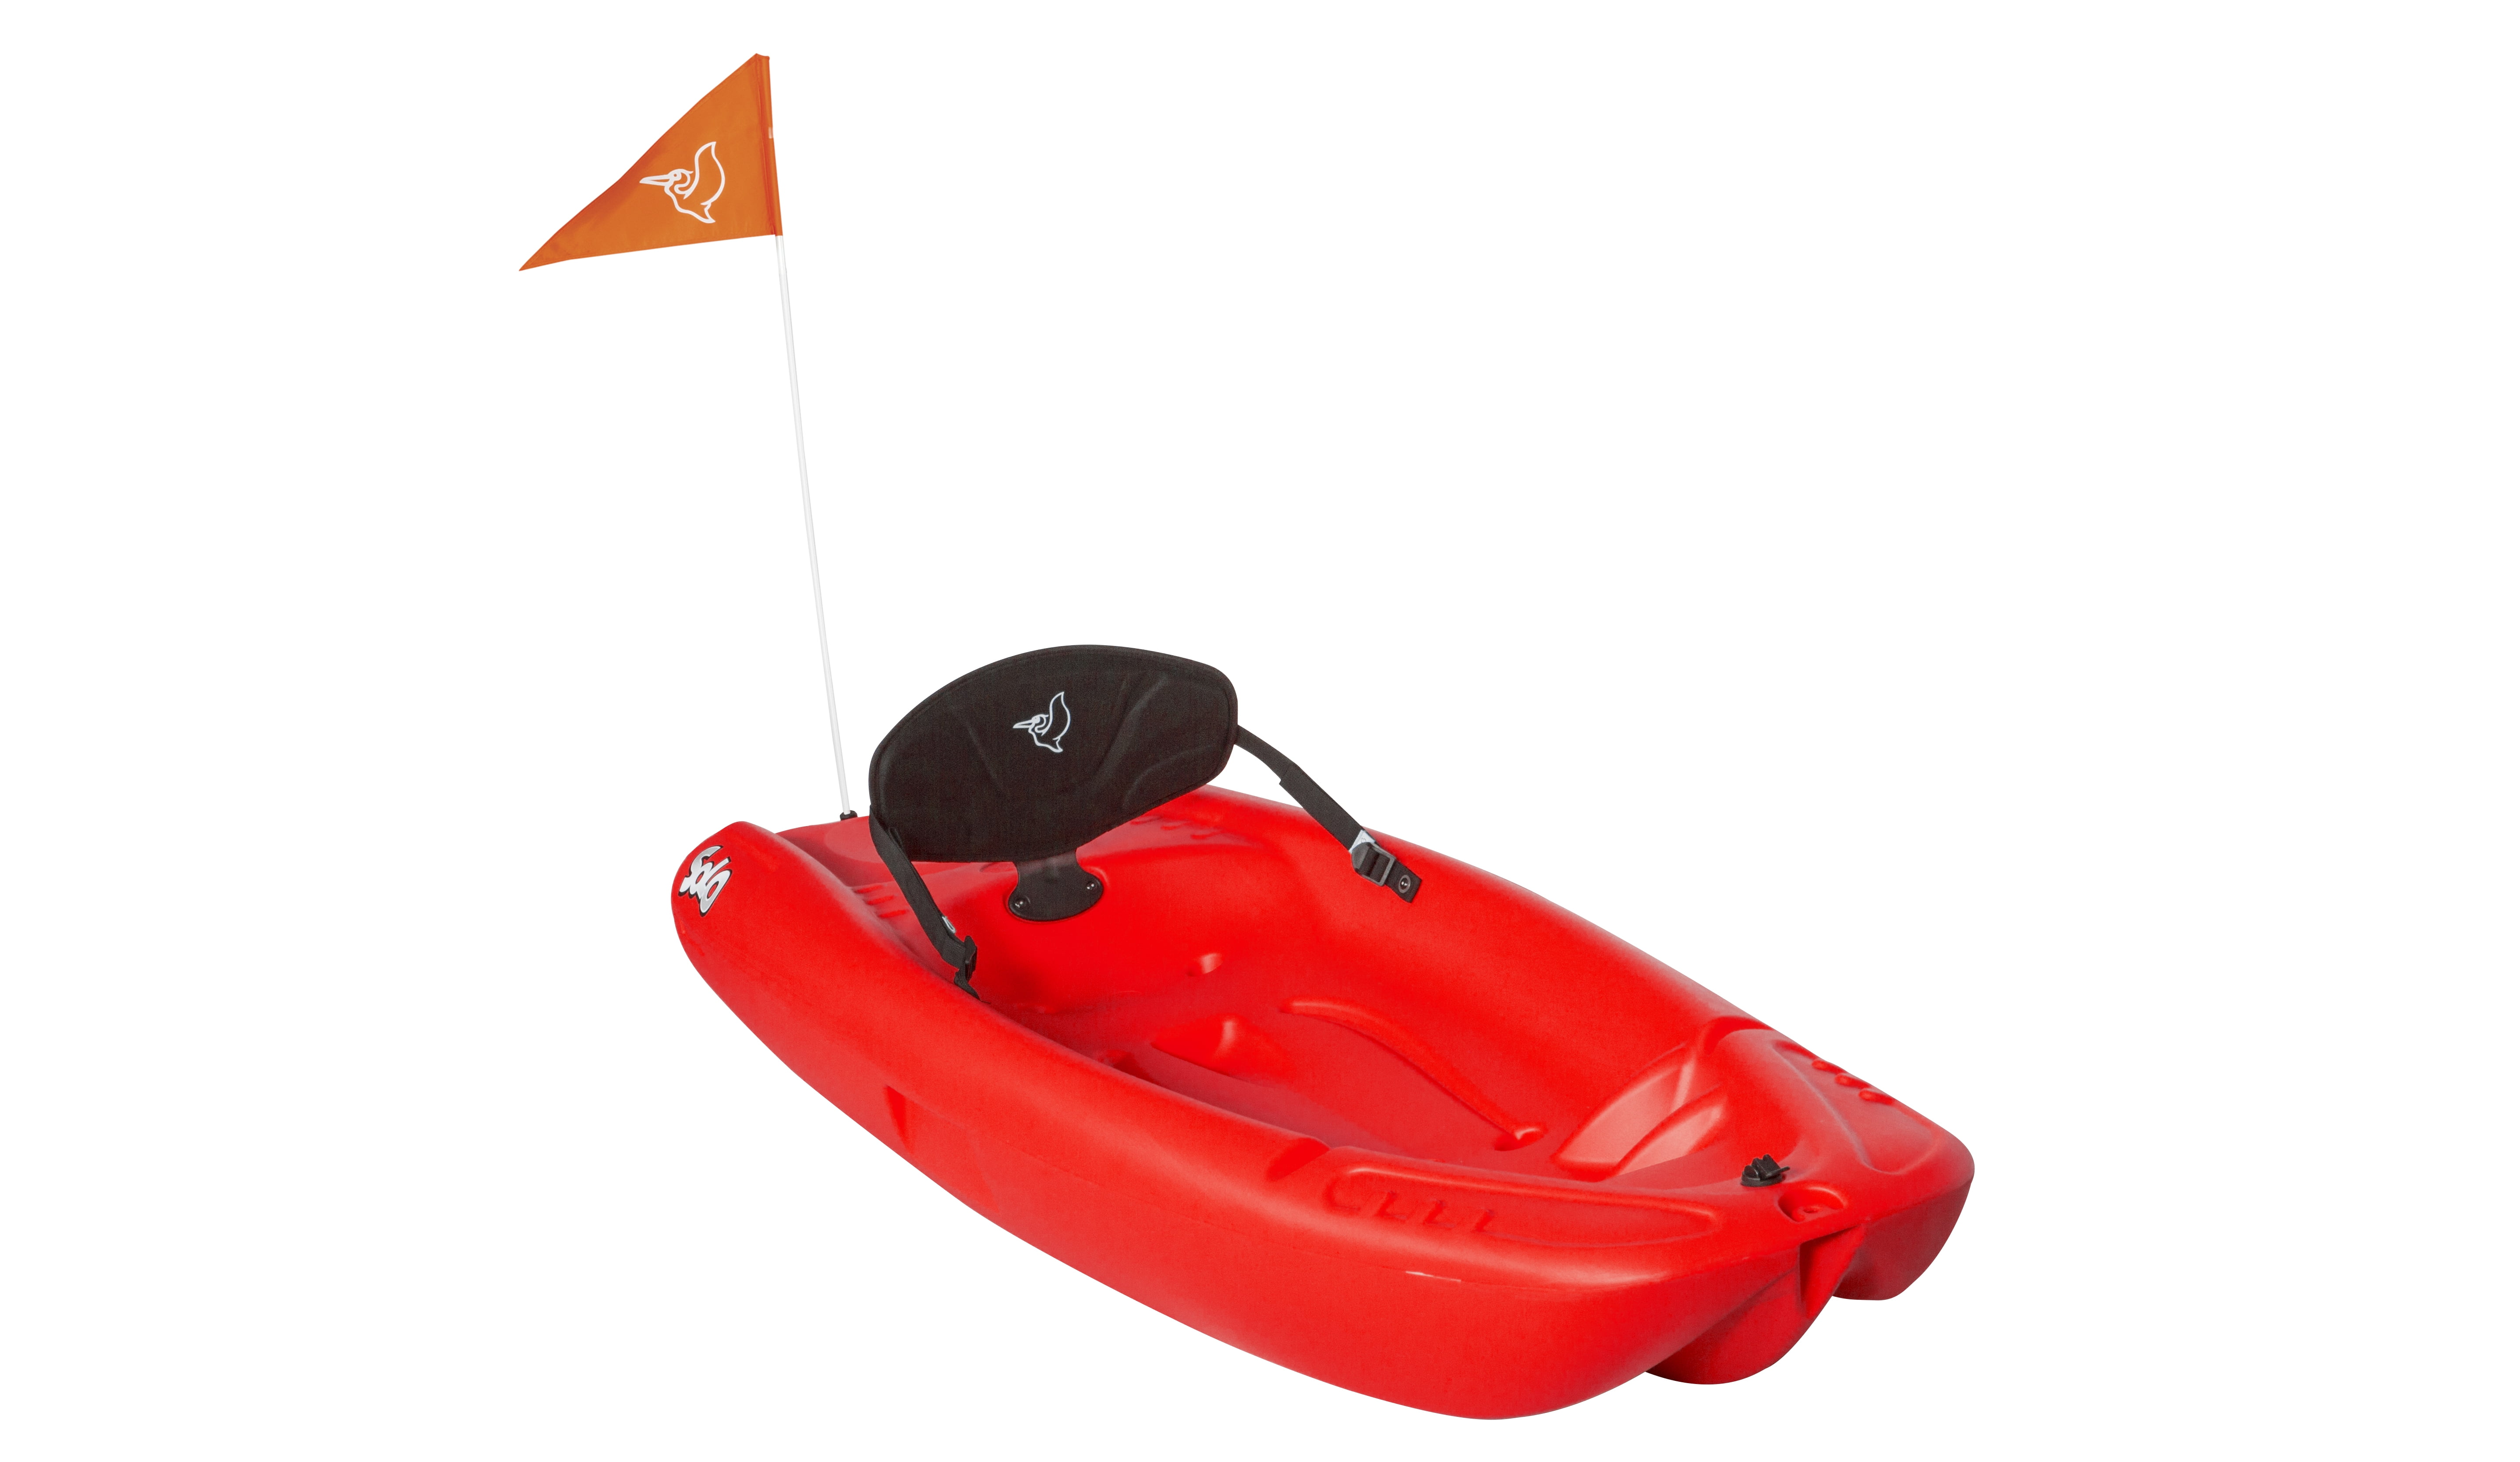 Pelican - Solo Kids Kayak with paddle - Fireman Red 